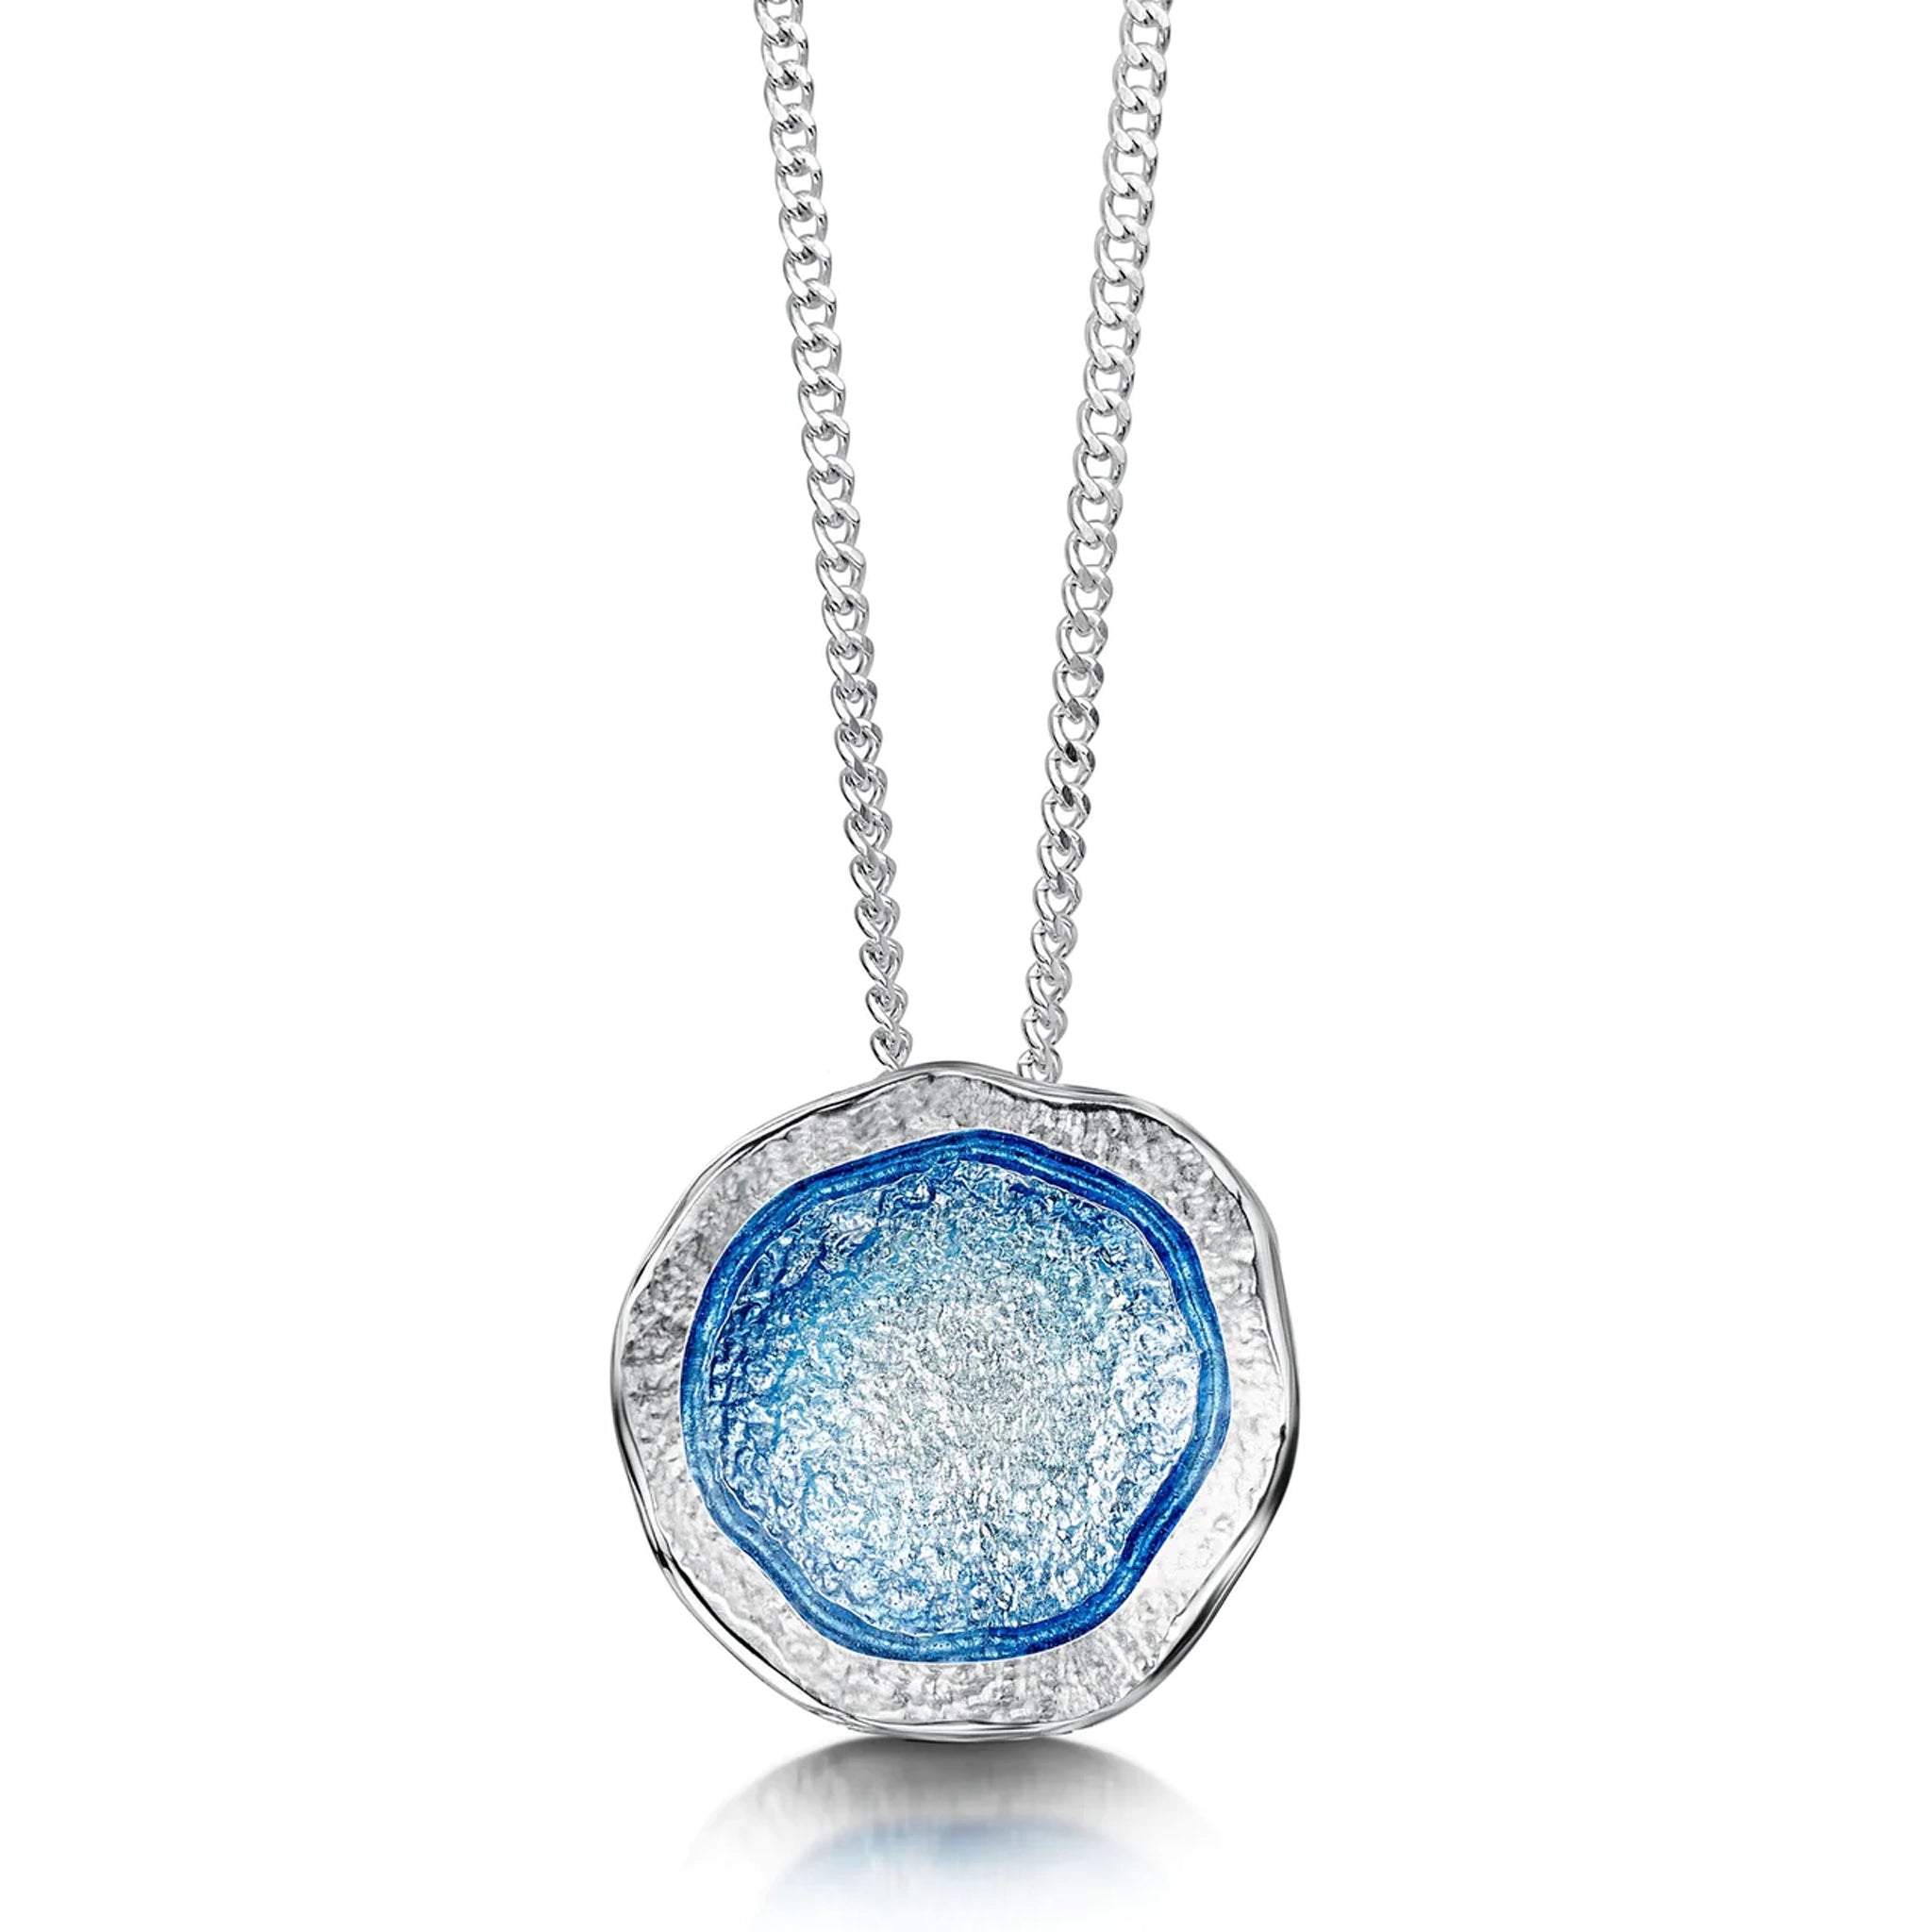 Silver pendant on chain in an irregular, organic shape with subtle texture and blue enamelled centre